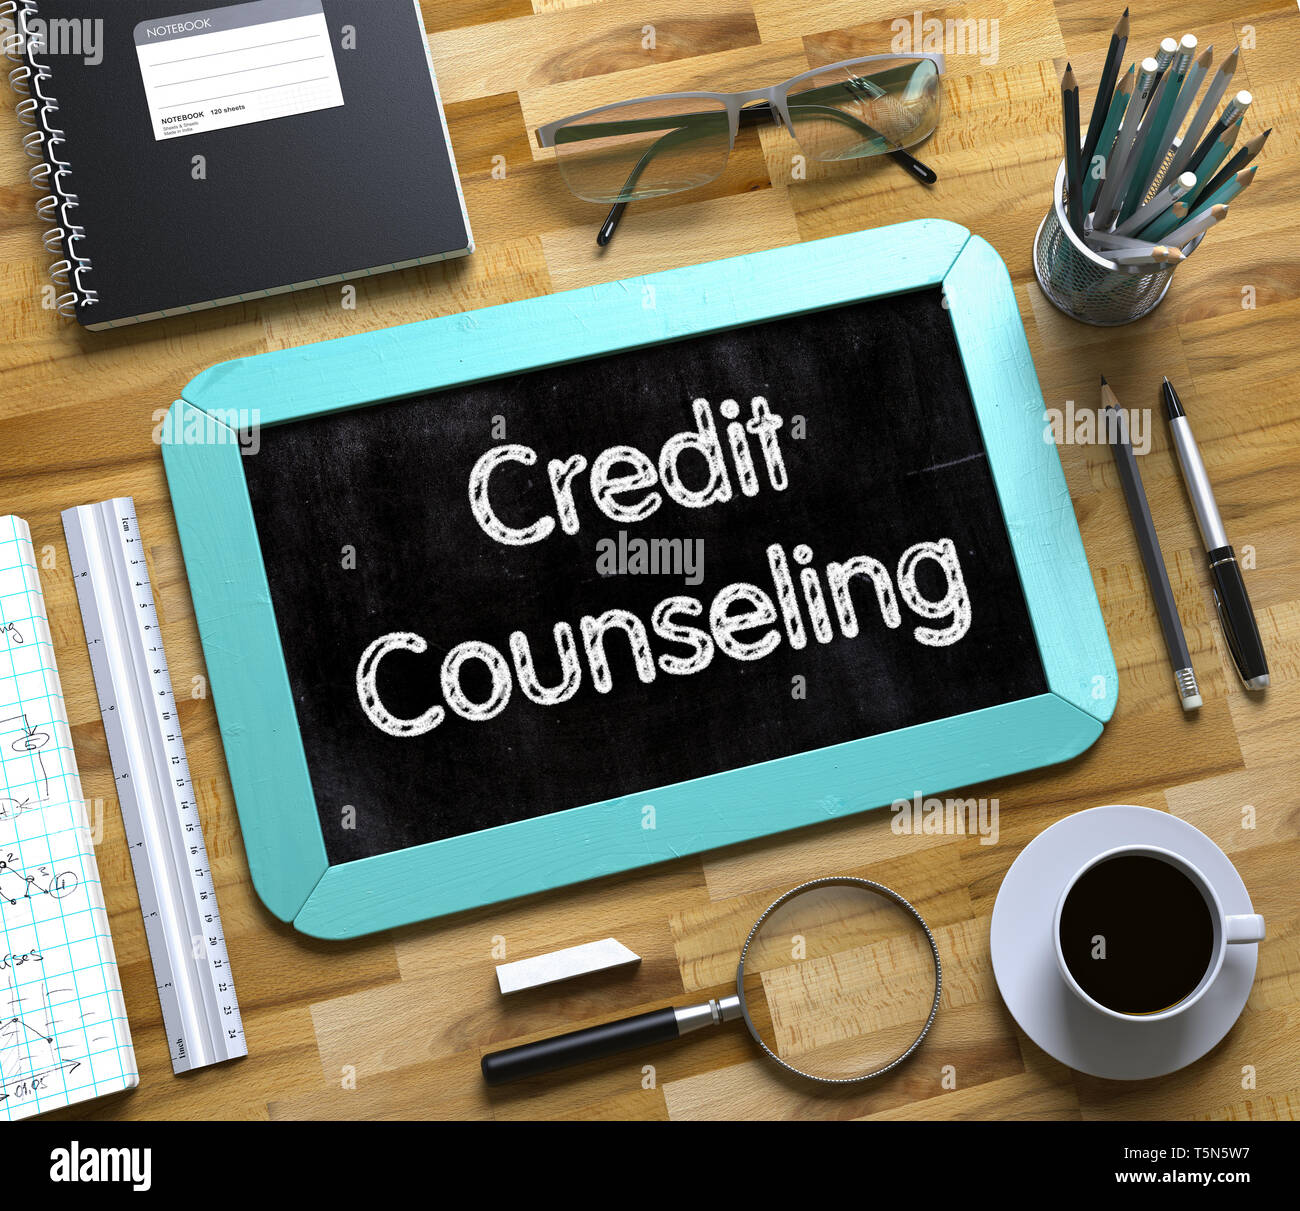 Credit Counseling - Text on Small Chalkboard.Top View of Office Desk with Stationery and Mint Small Chalkboard with Business Concept - Credit Counseli Stock Photo